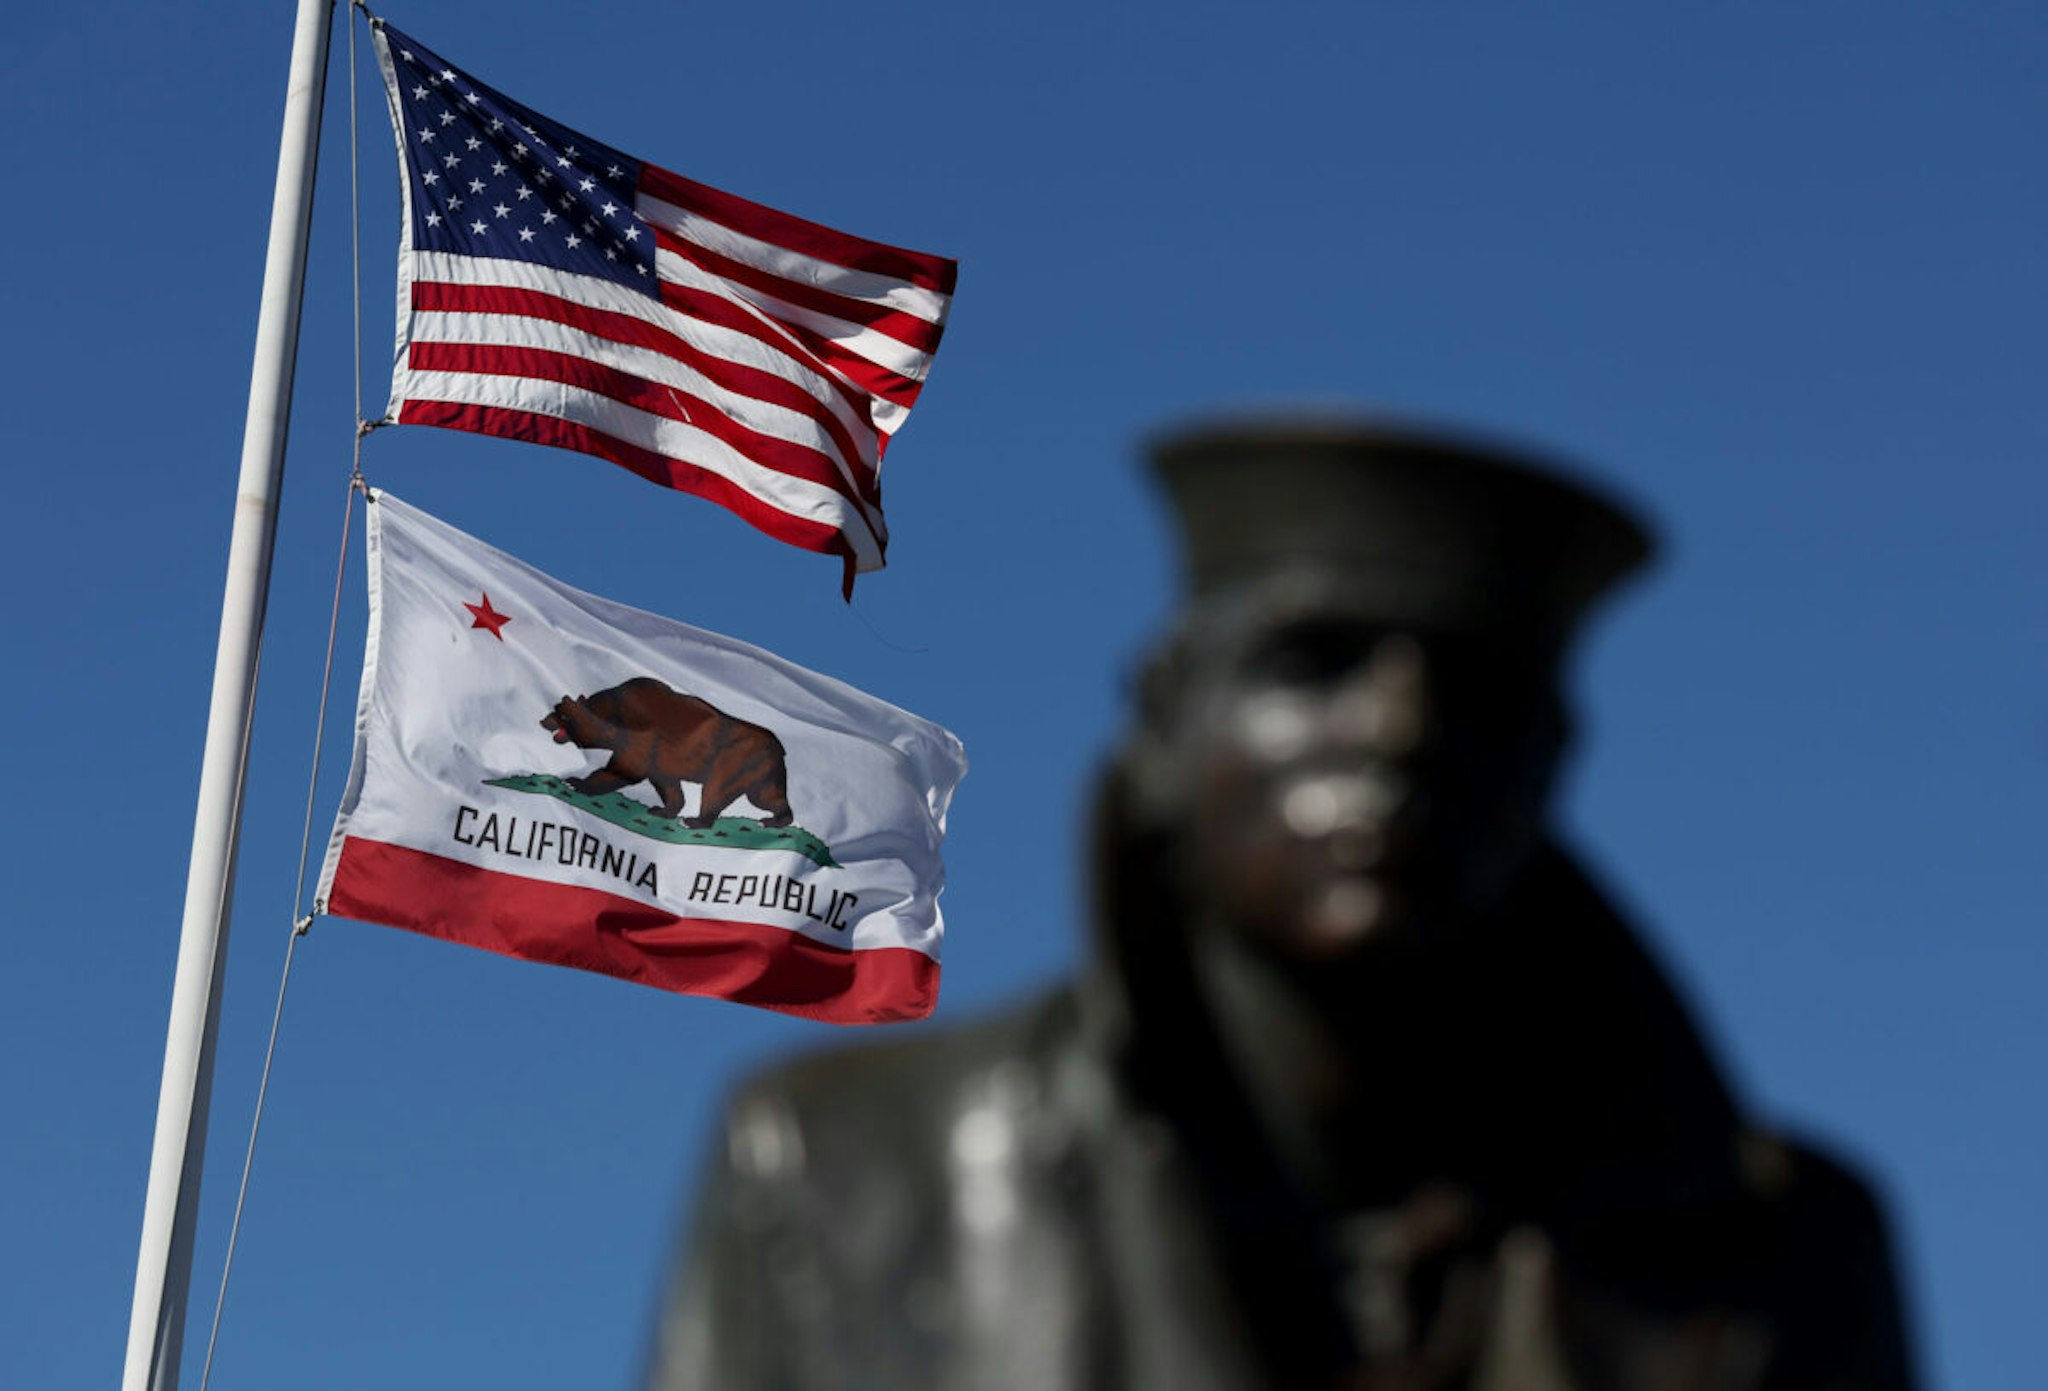 An American flag flies with the California State flag next to the Lone Sailor statue on October 24, 2022 in Sausalito, California.